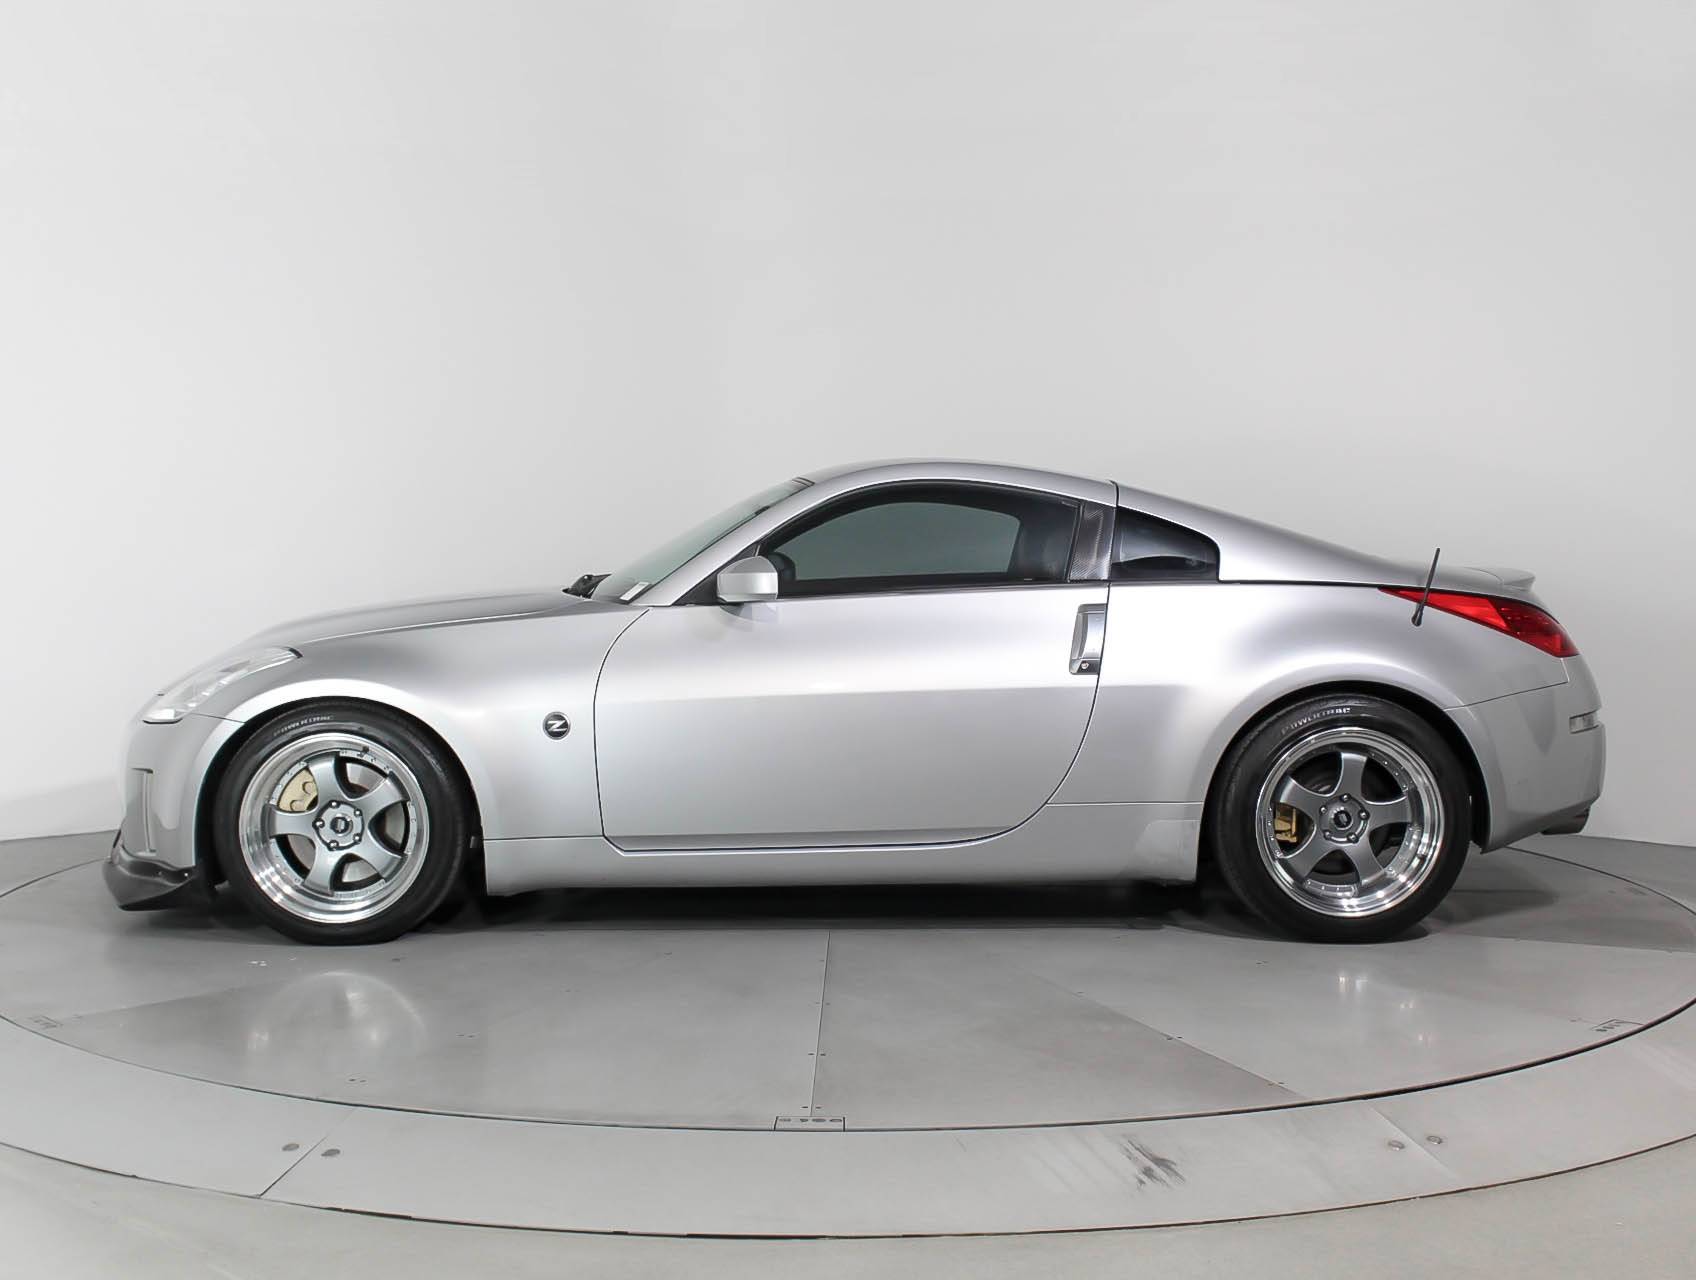 Used 2007 NISSAN 350Z Grand Touring for sale in MIAMI | 92031 | Carvix